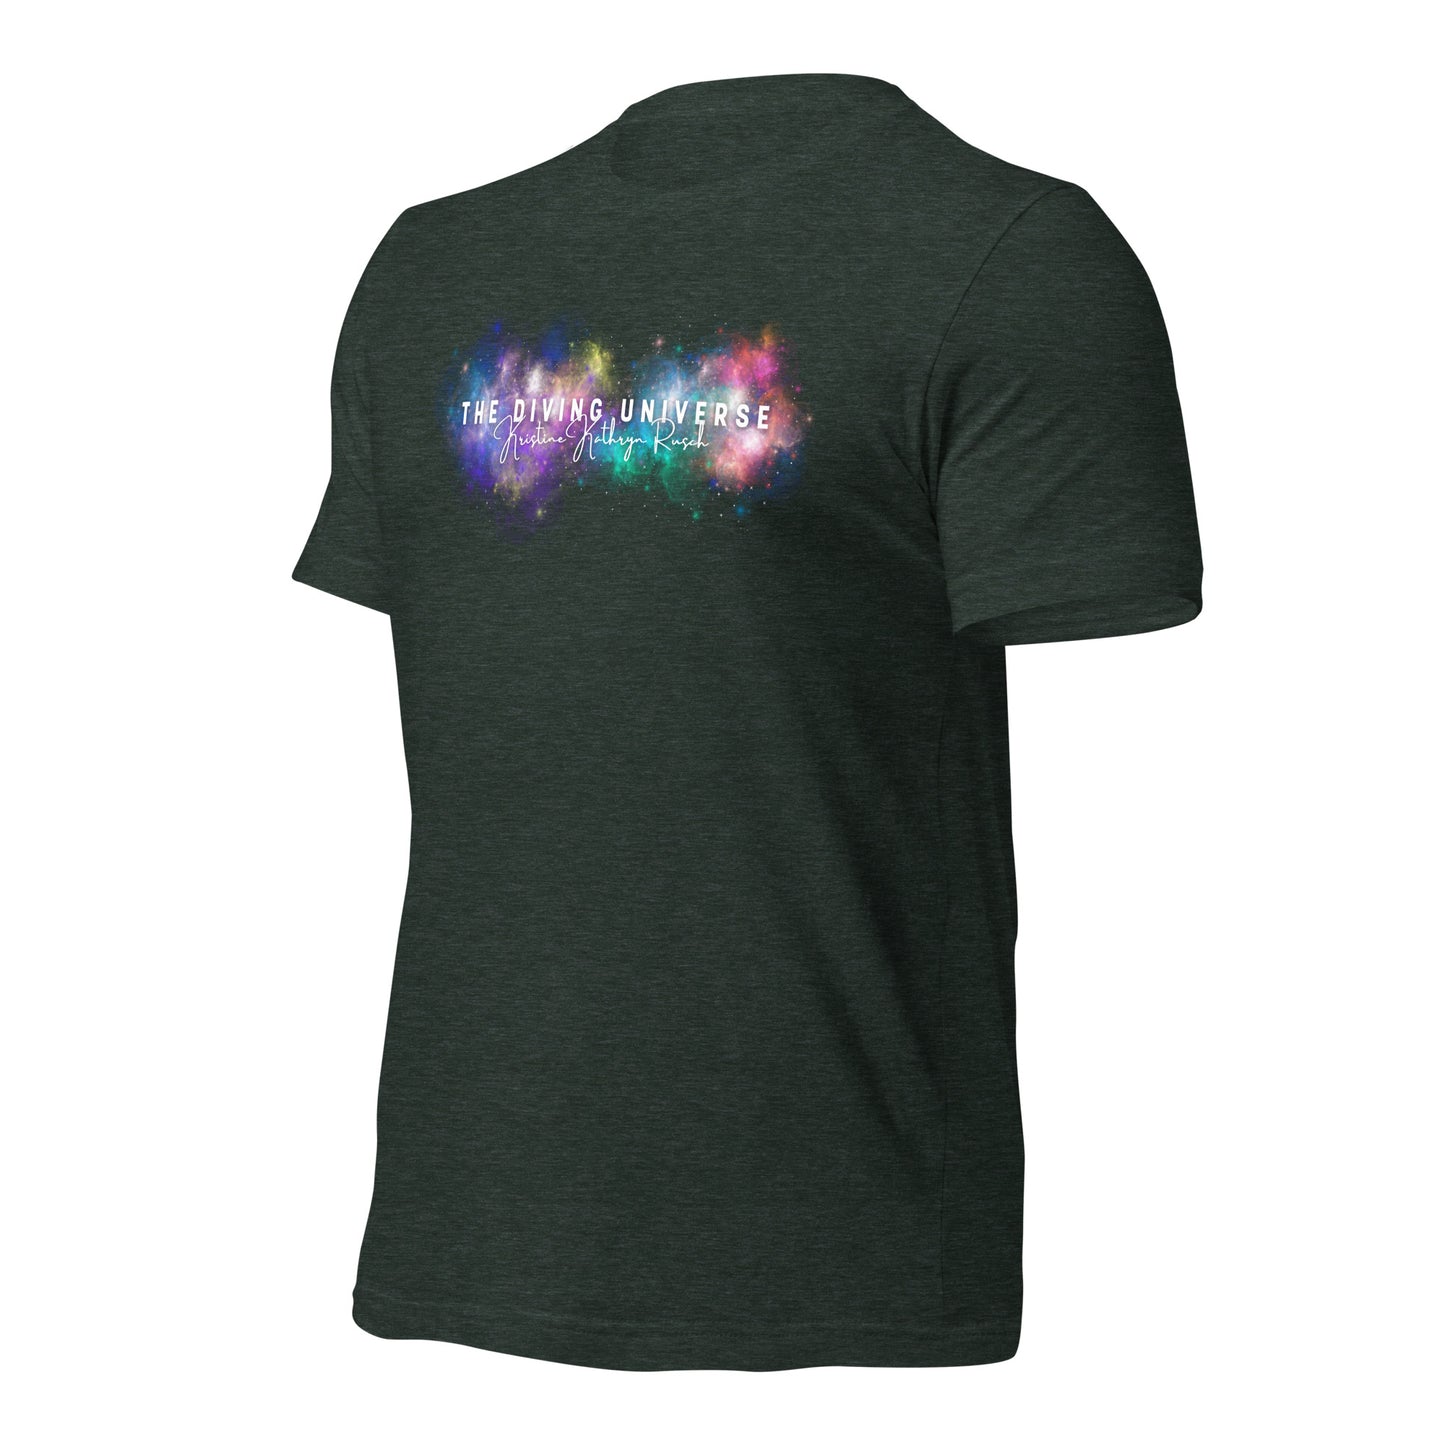 DIVING UNIVERSE NEBULA T-Shirt - The Diving Universe by Kristine Kathryn Rusch